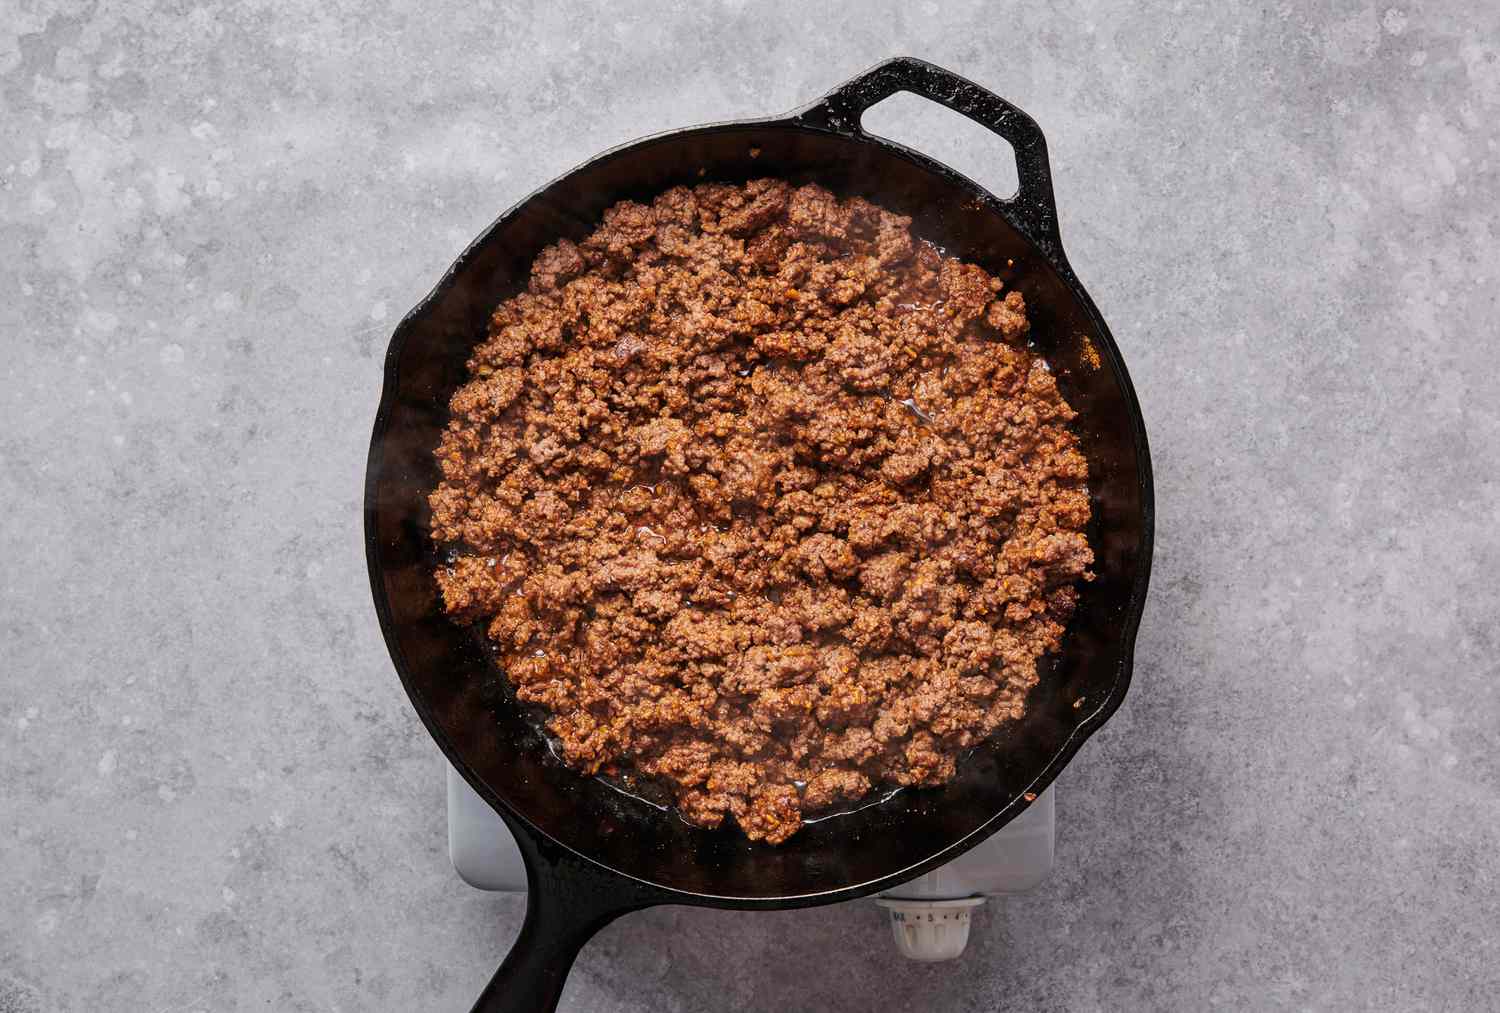 A skillet of cooked ground beef seasoned with taco seasoning